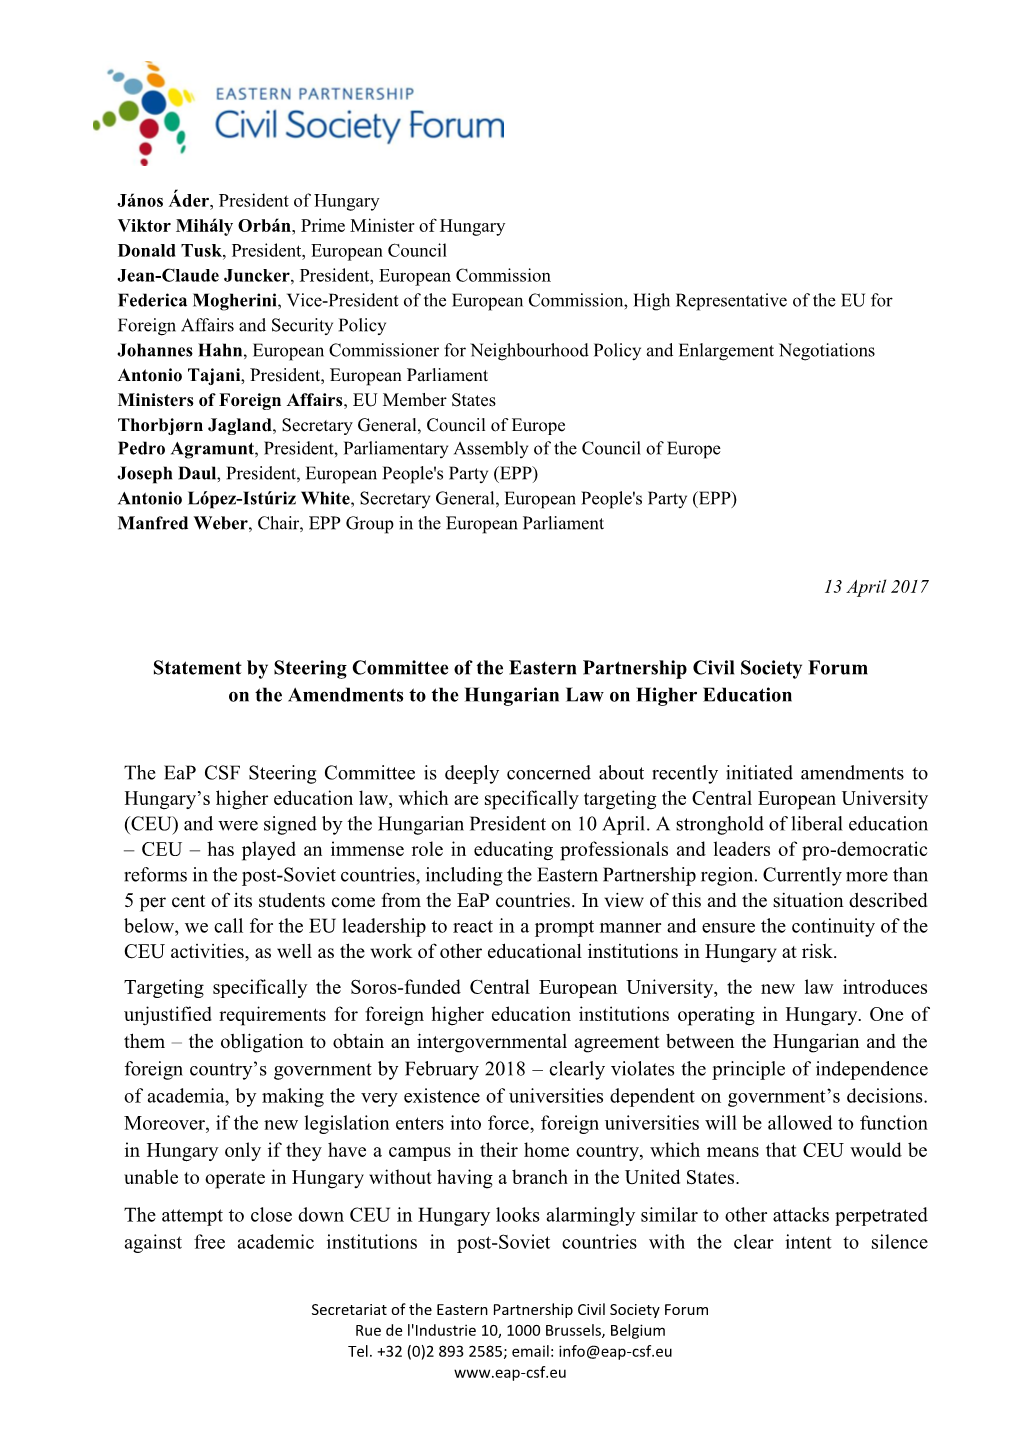 Statement by Steering Committee of the Eastern Partnership Civil Society Forum on the Amendments to the Hungarian Law on Higher Education